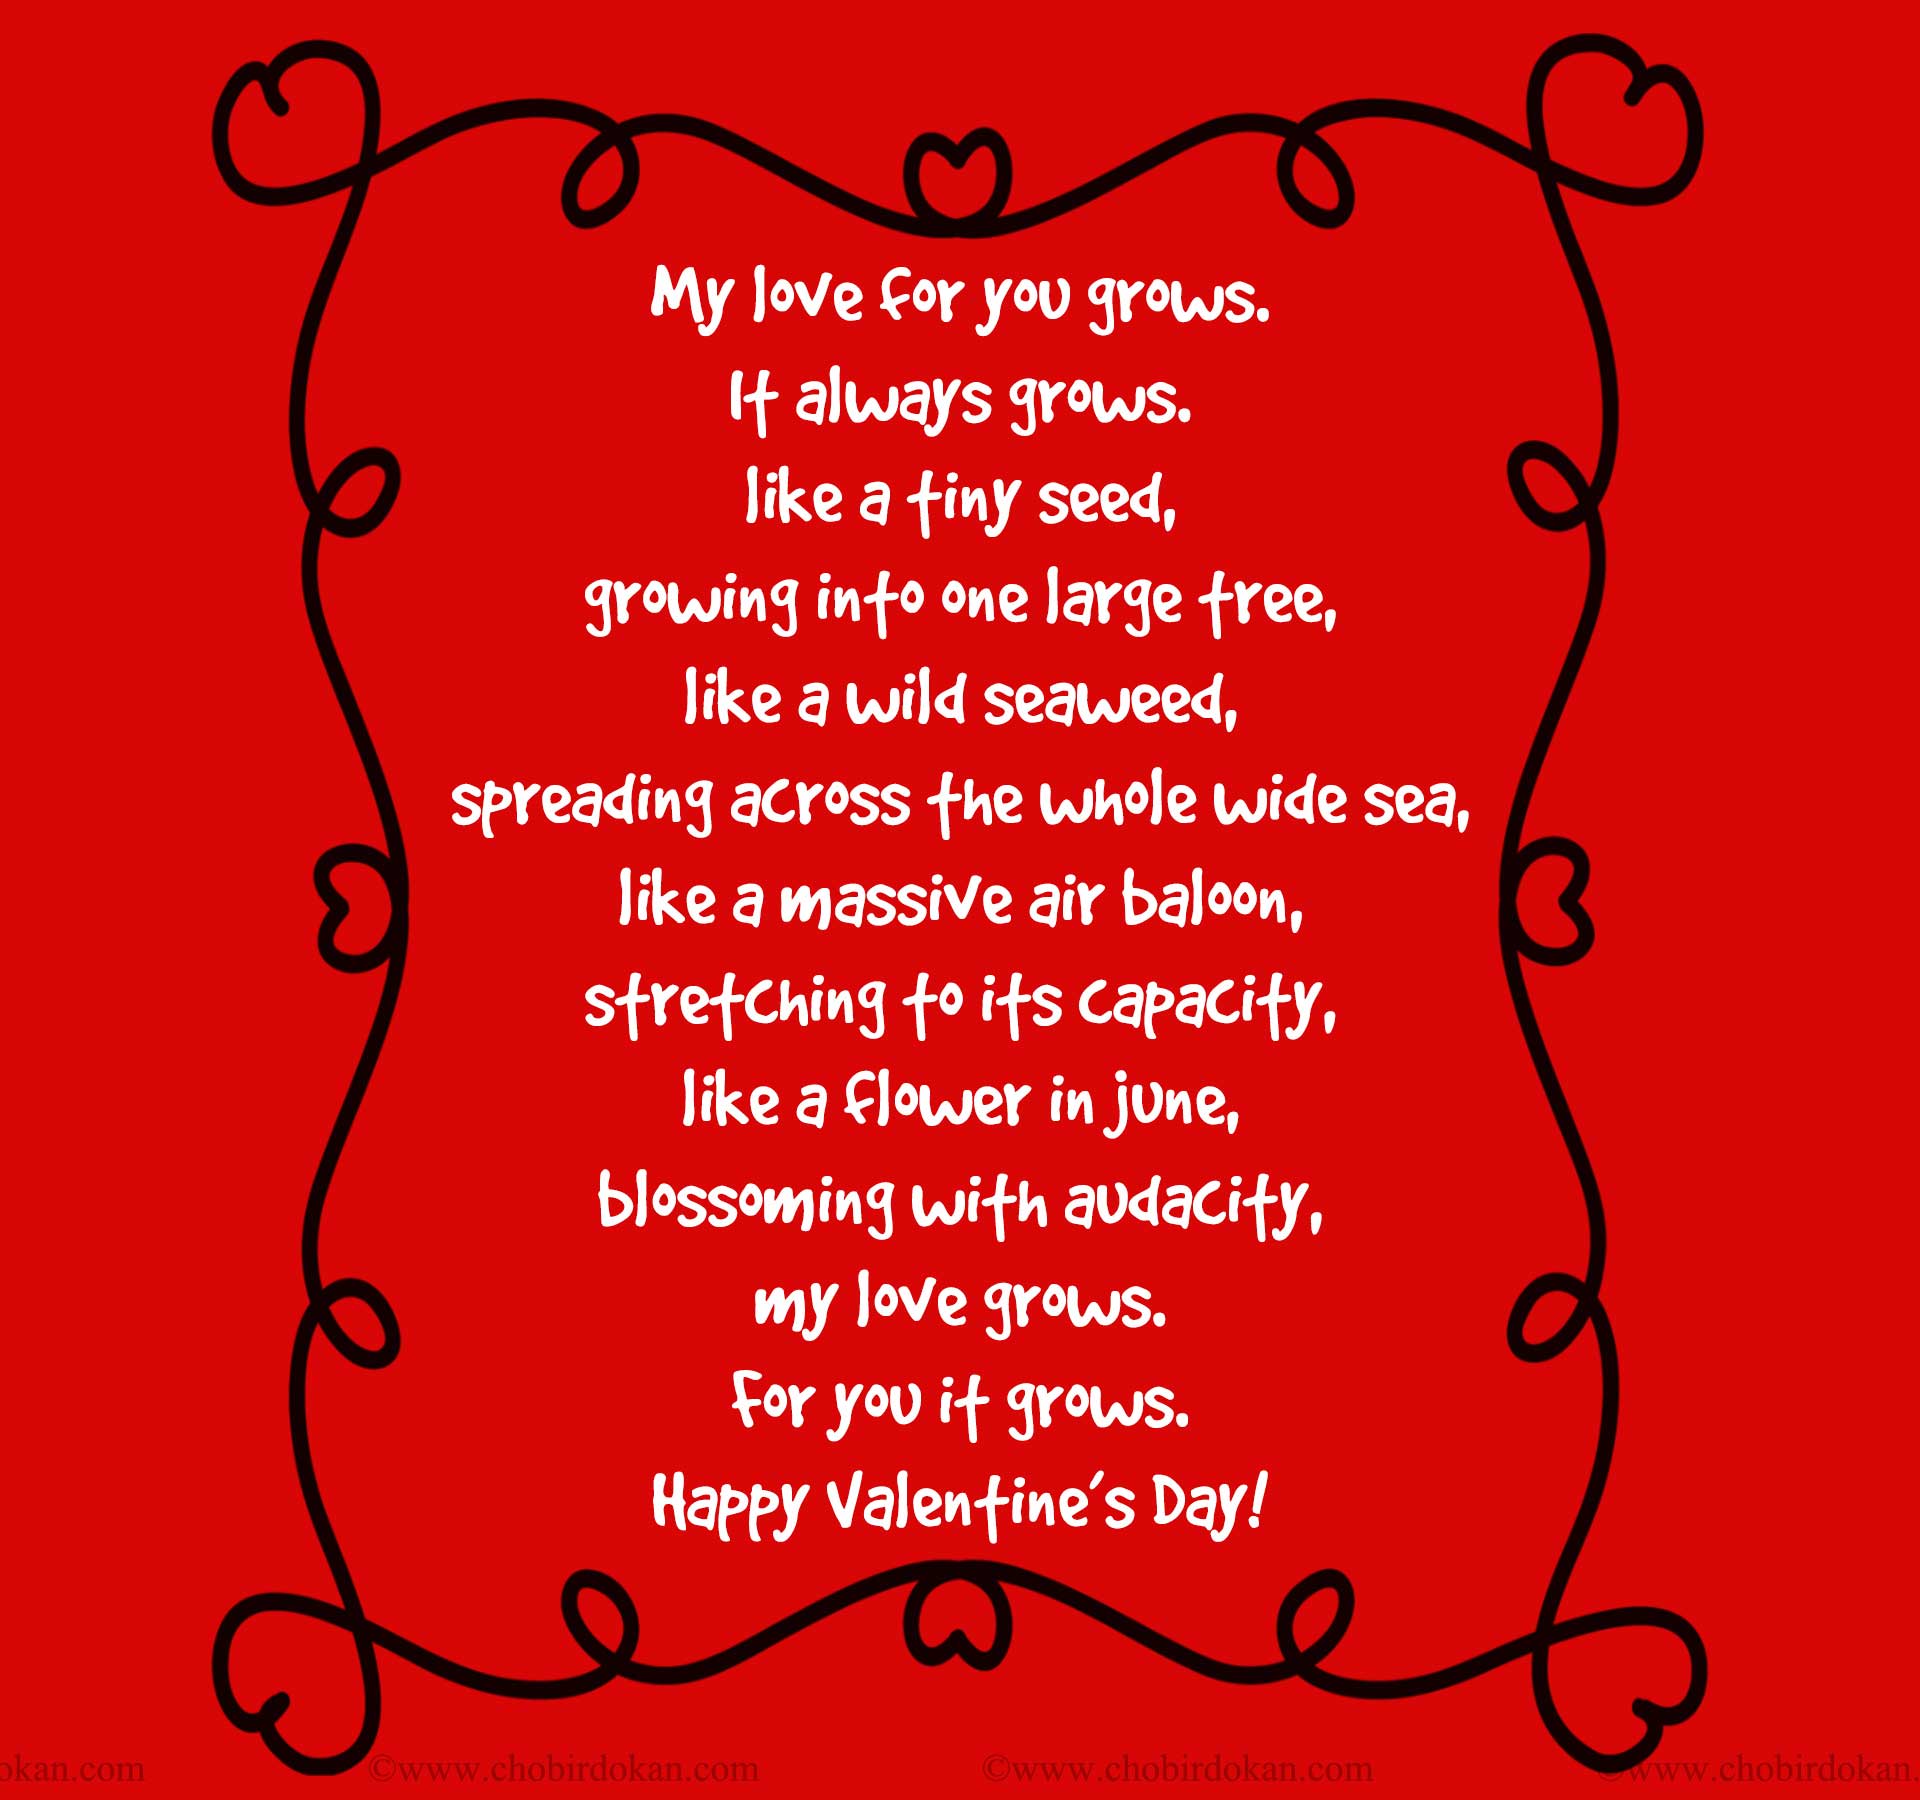 Valentines Poems For Him; For Your Boyfriend or Husband|Poems|Chobirdokan1920 x 1800